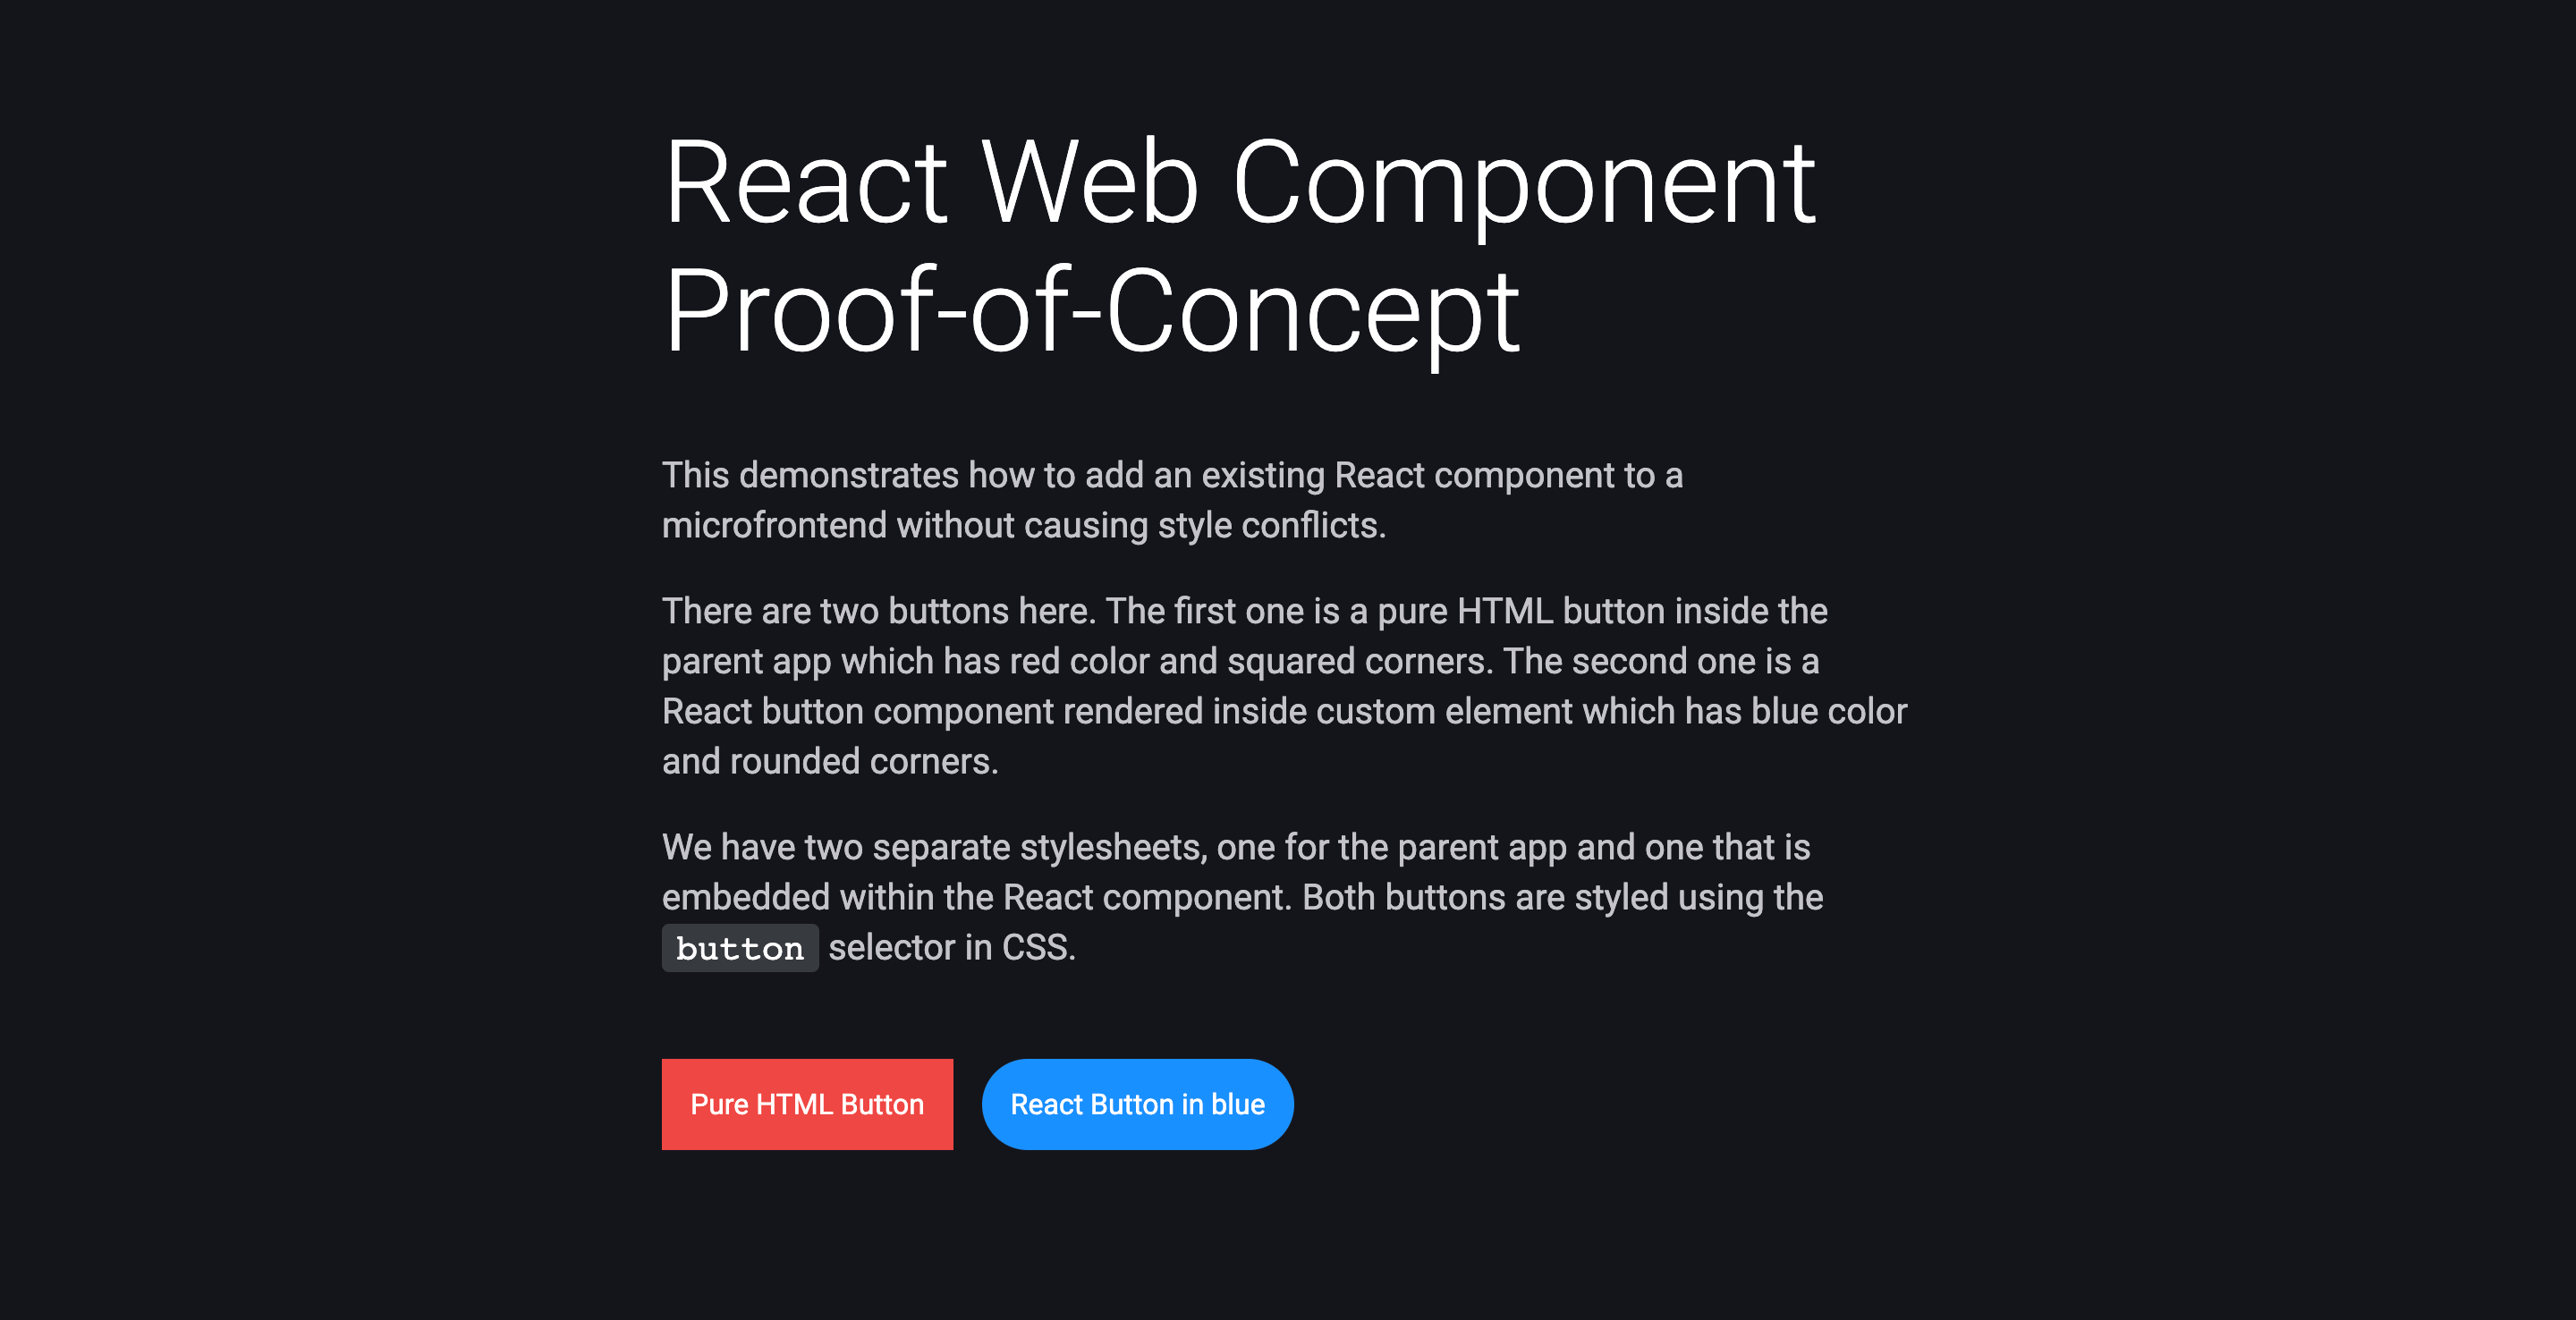 Screenshot of React Web Component Proof-of-Concept